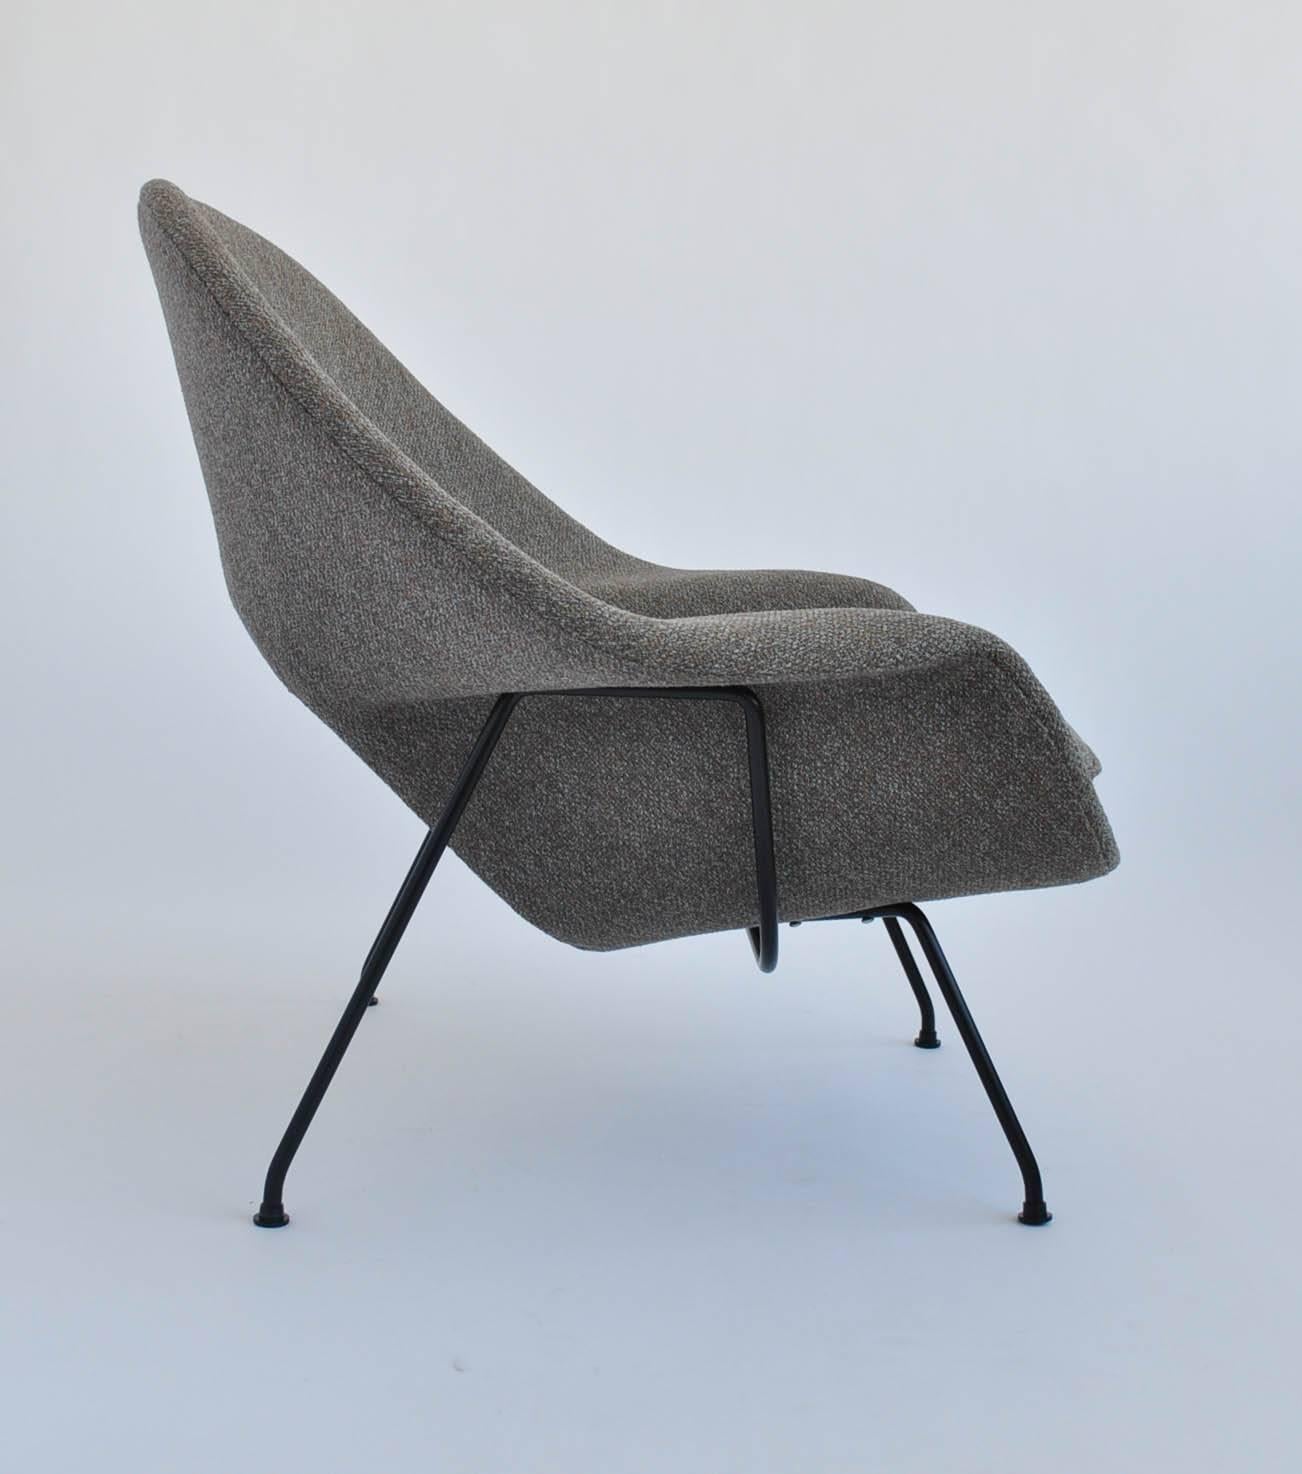 Powder-Coated Early Restored Womb Chair by Eero Saarinen for Knoll